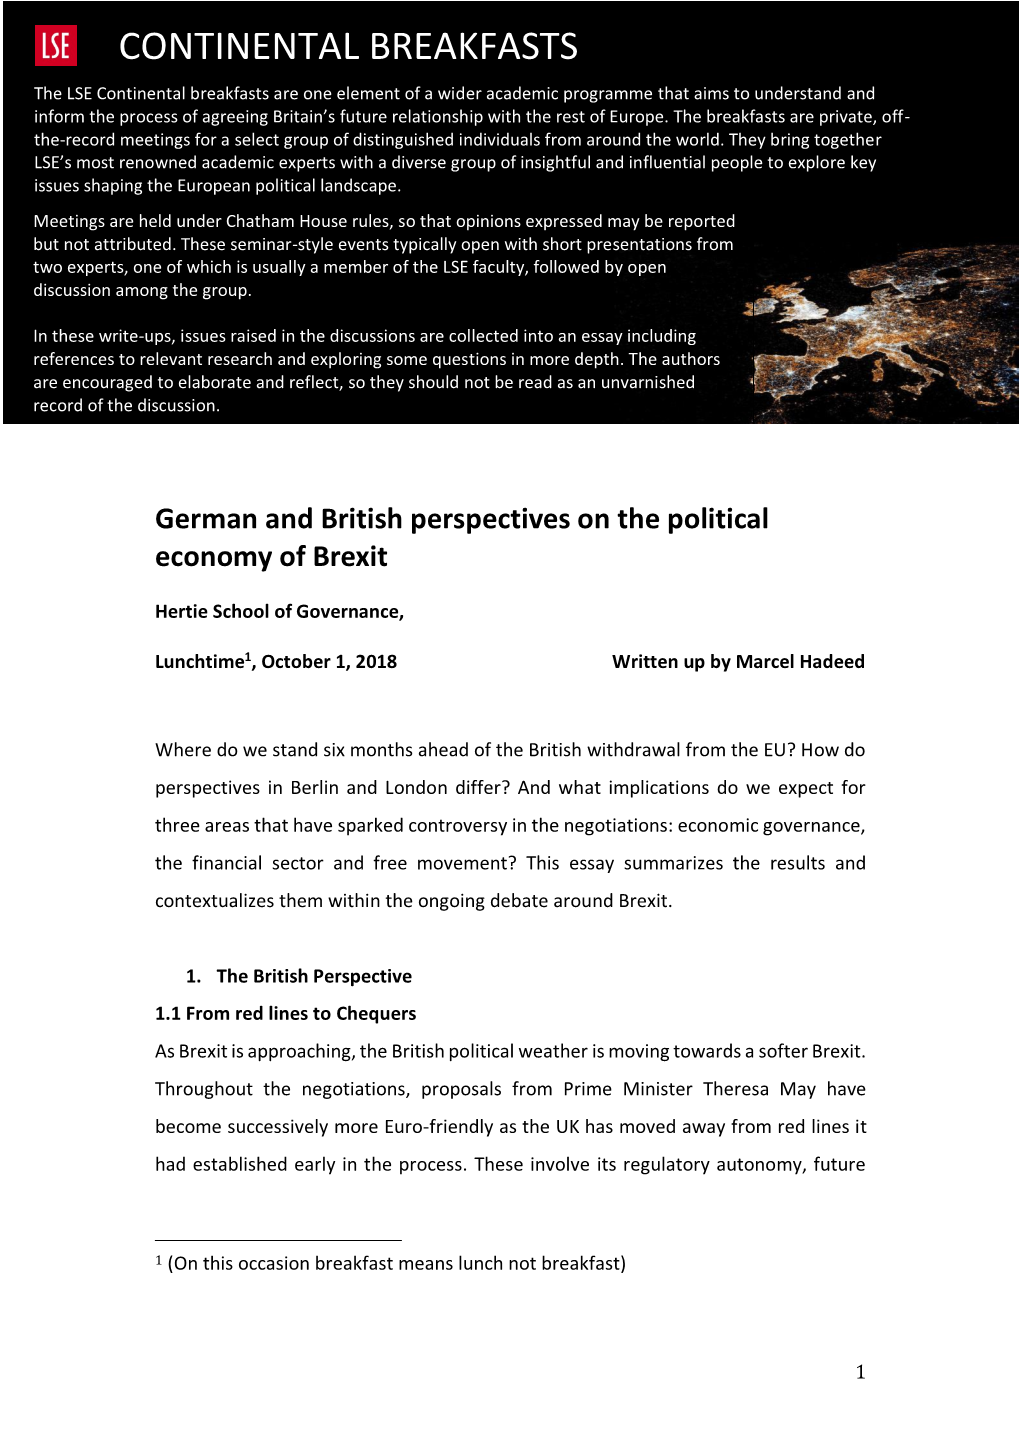 German and British Perspectives on the Political Economy of Brexit